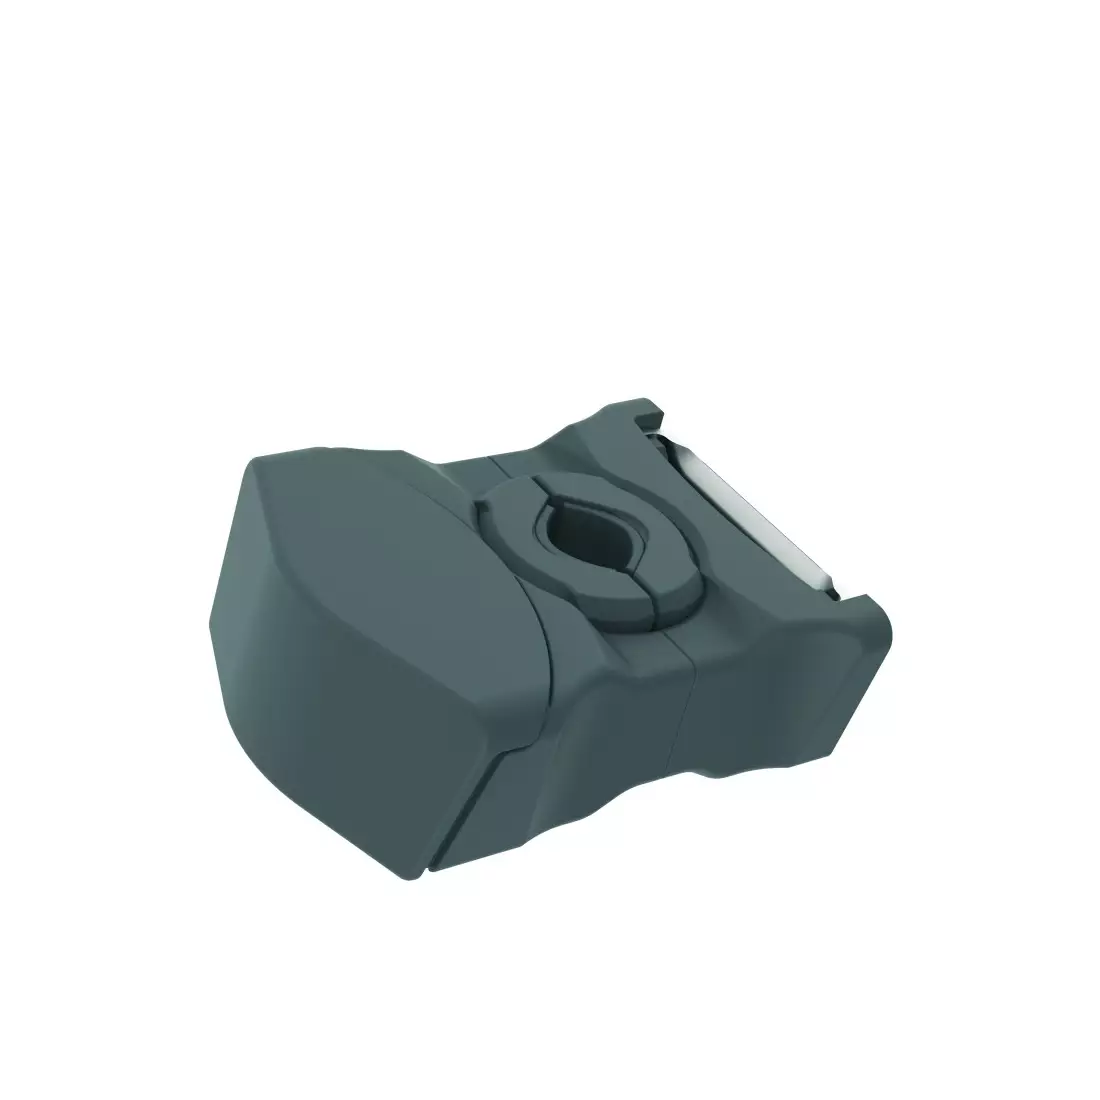 URBAN IKI FRONT ATTACHMENT COMPACT ADAPTER U-212399